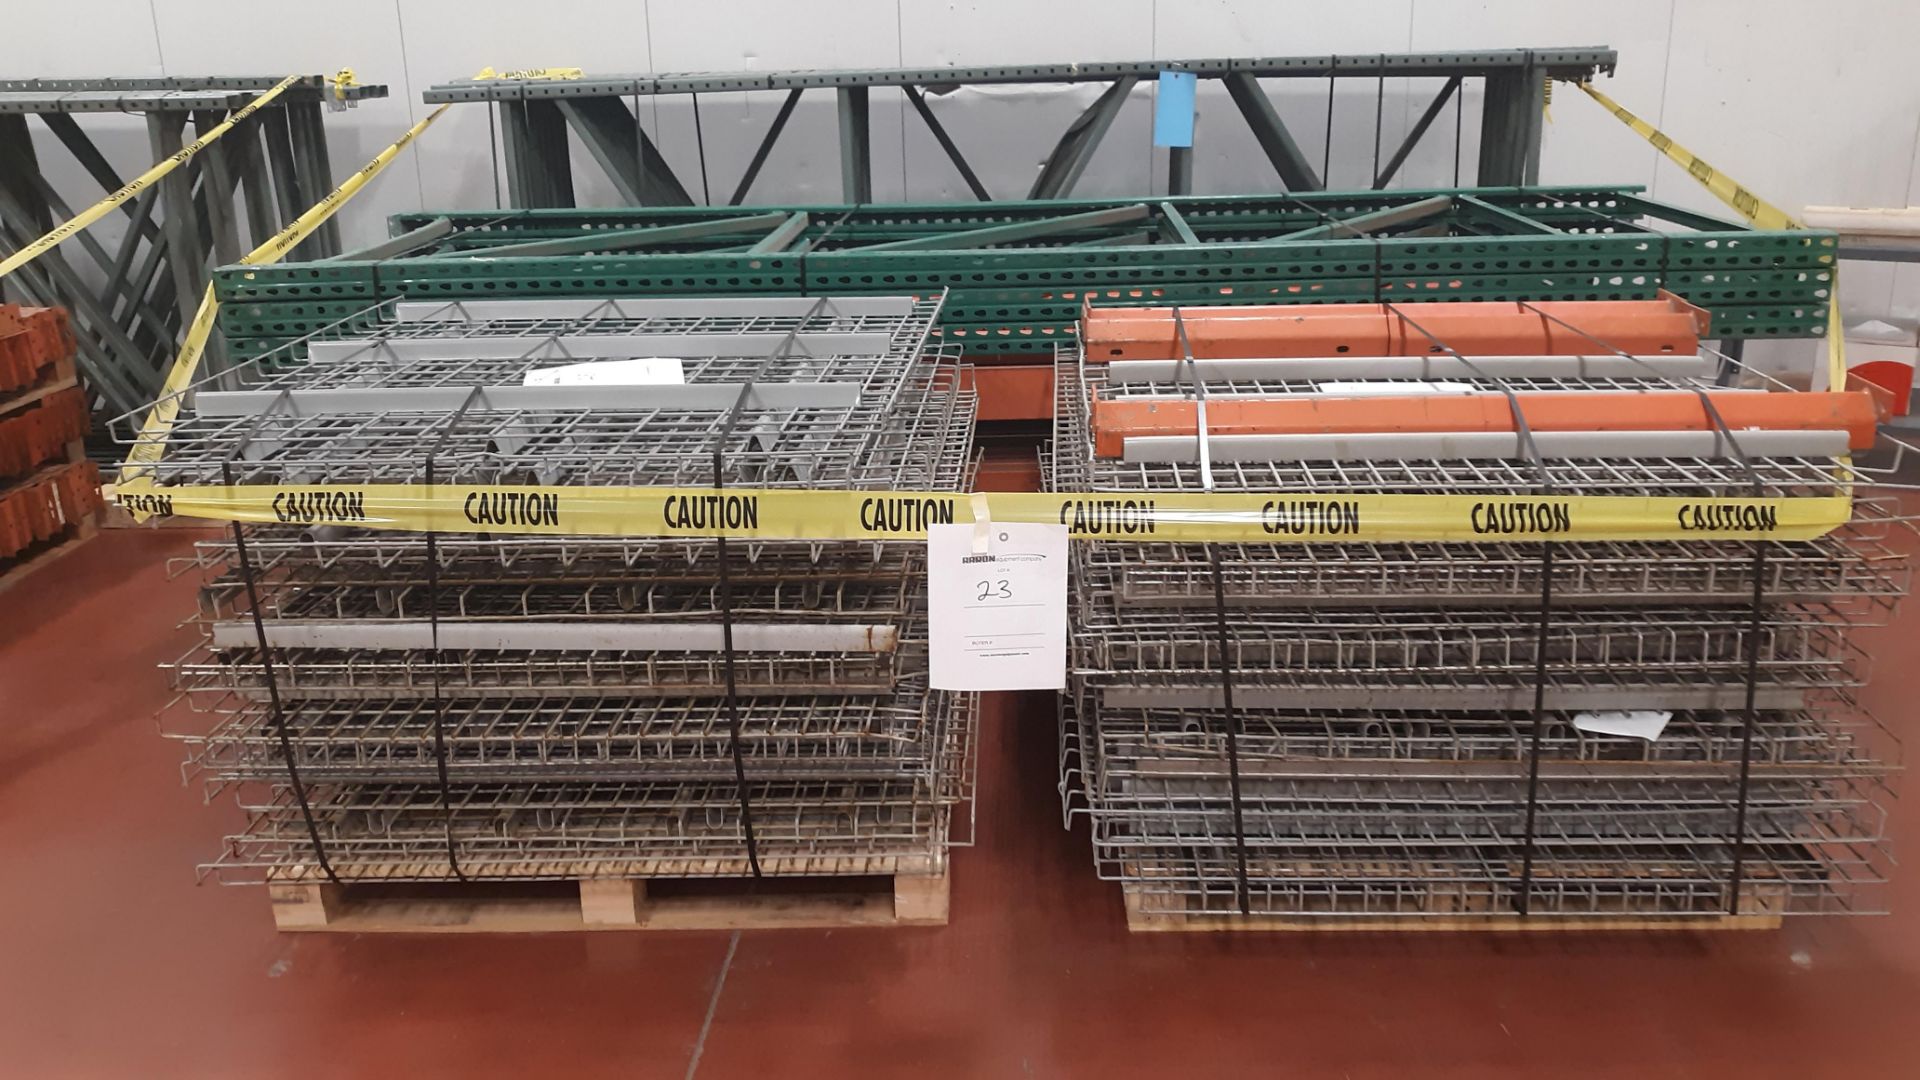 (12) Sections of Pallet Racking, Approximate 8' x 4' x 12'. (NO CONTENTS) - Image 3 of 3